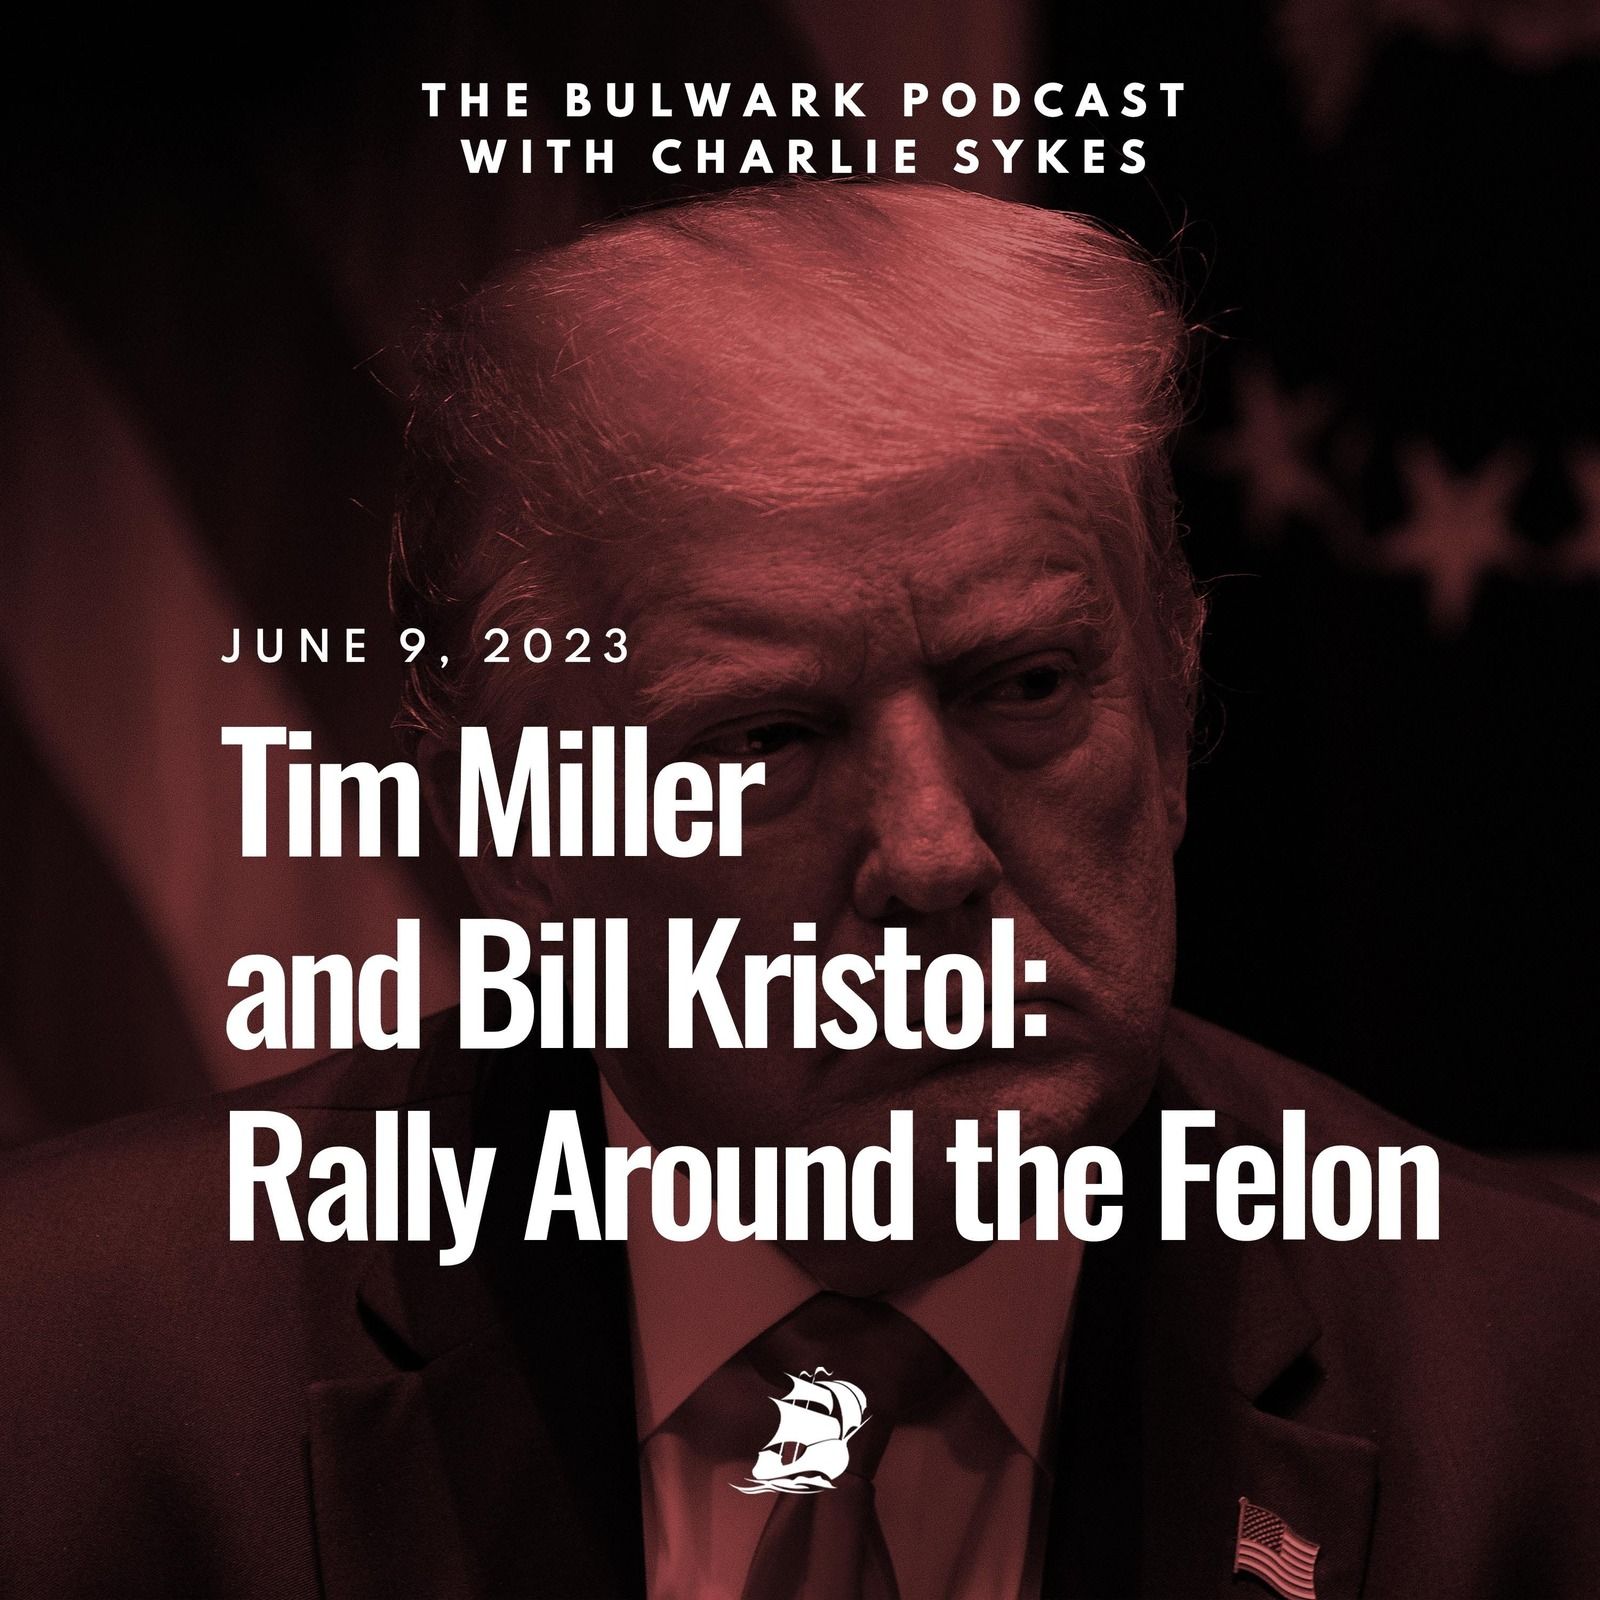 Tim Miller and Bill Kristol: Rally Around the Felon by The Bulwark Podcast